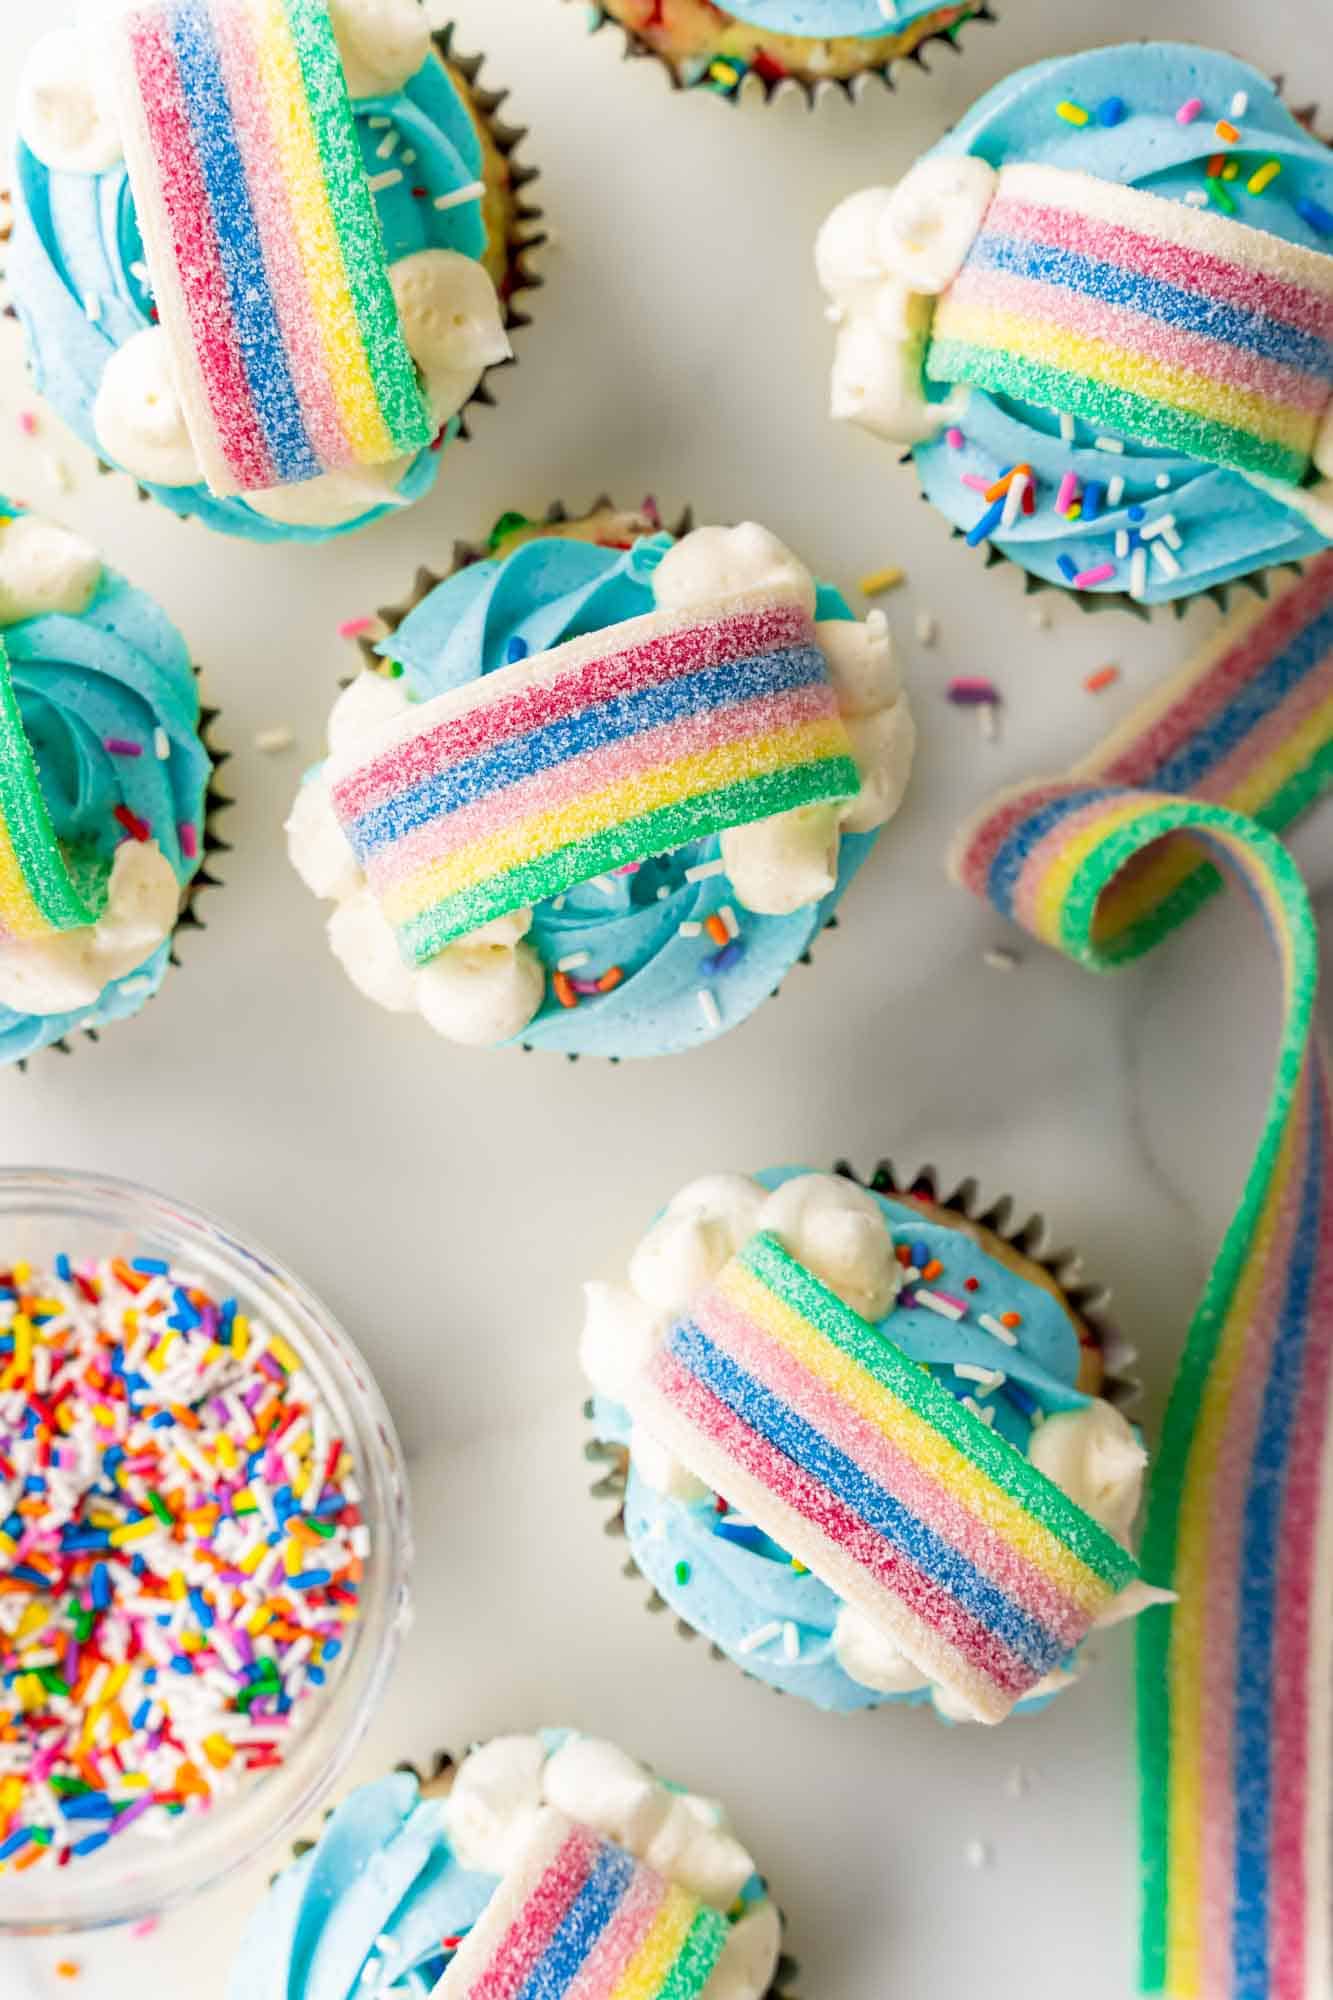 Overhead shot of rainbow cupcakes and sprinkles